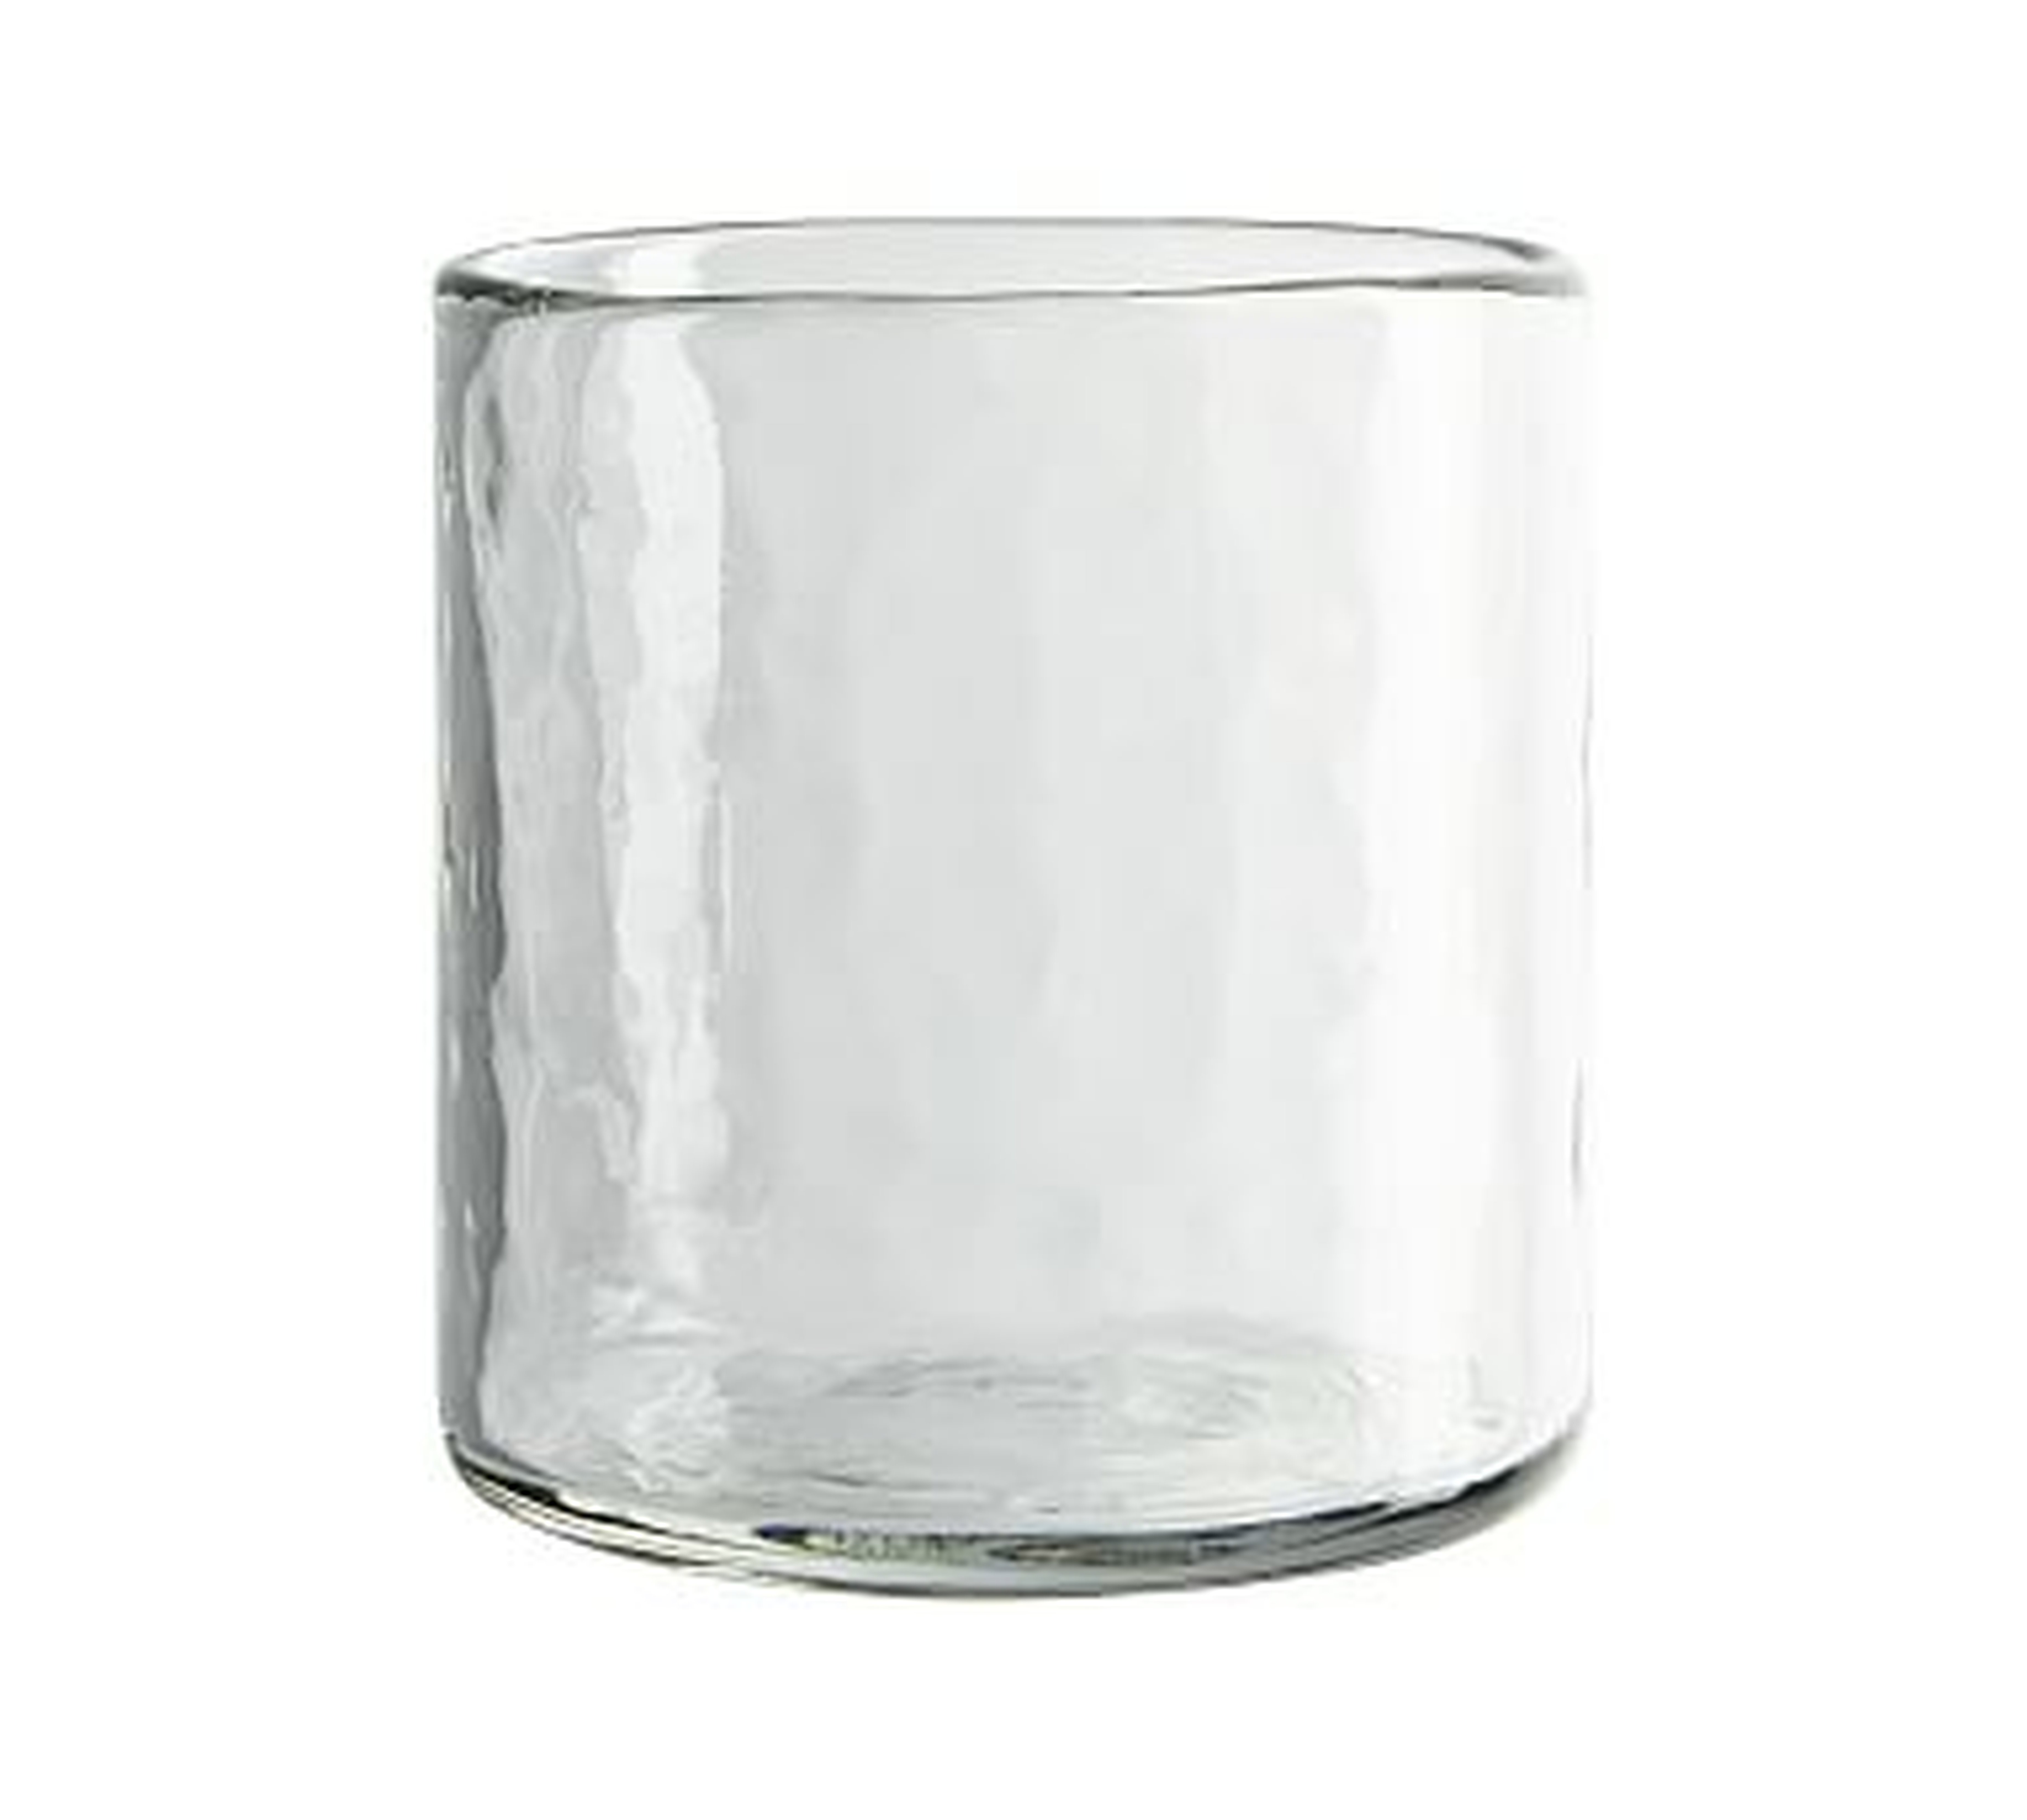 Hammered Short Drinking Glasses, 8.8 oz., Set of 4 - Clear - Pottery Barn